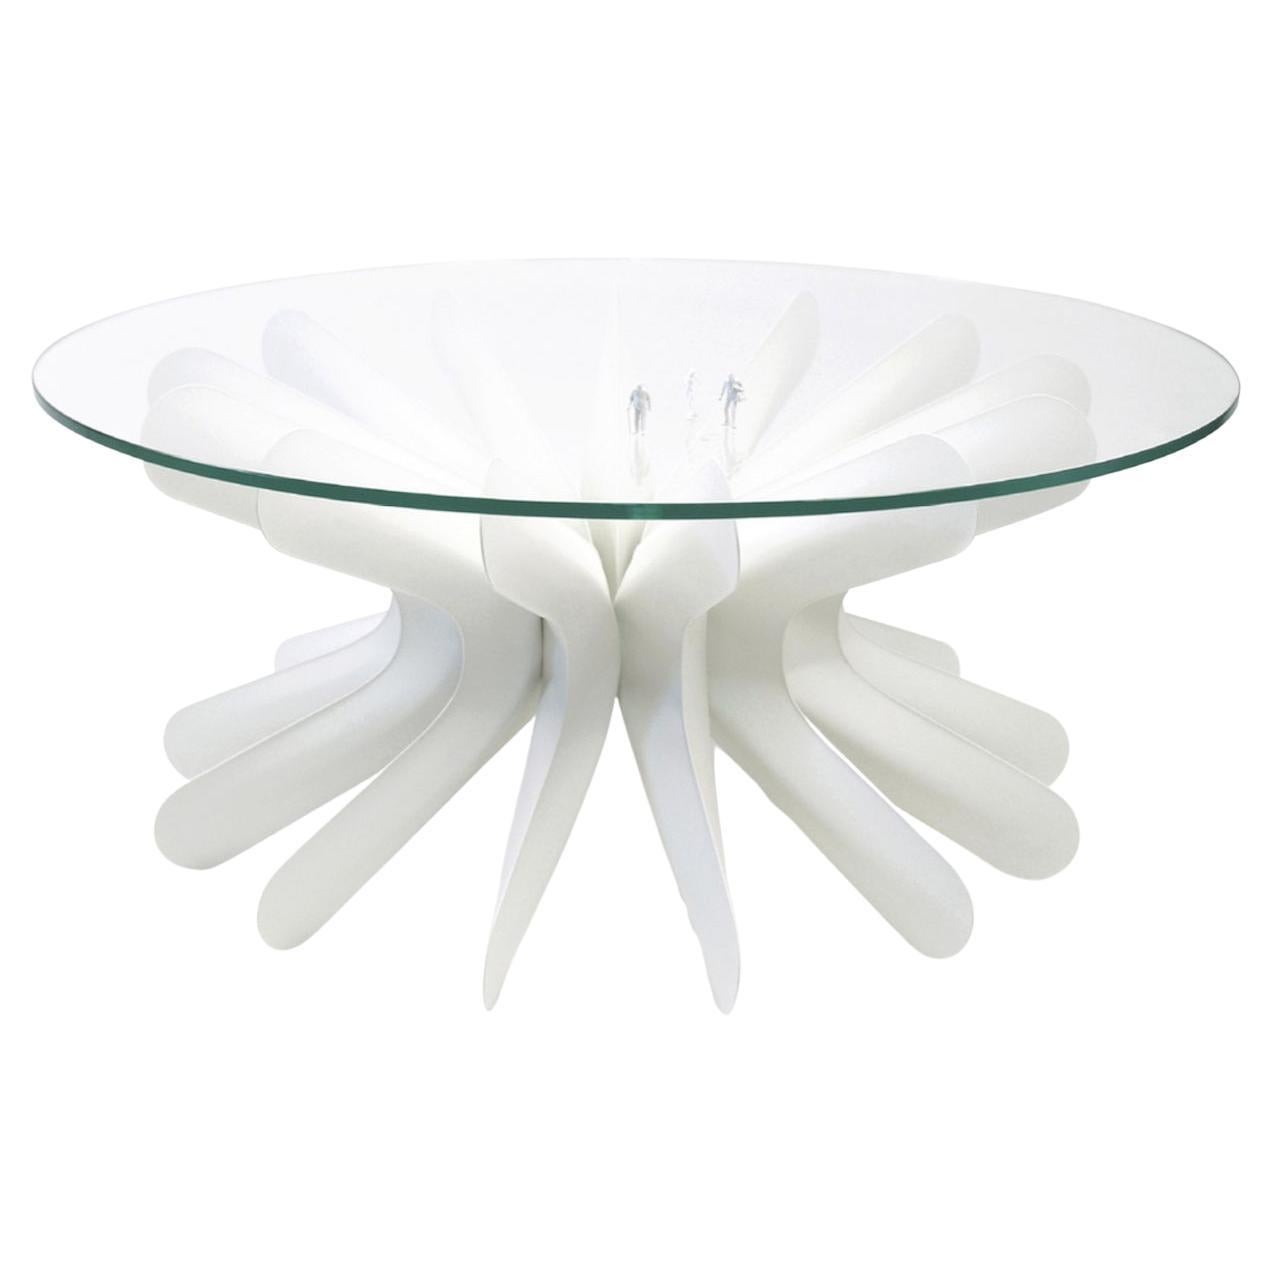 Contemporary Coffee Table 'Steel in Rotation No. 1' by Zieta, Large, White Matt